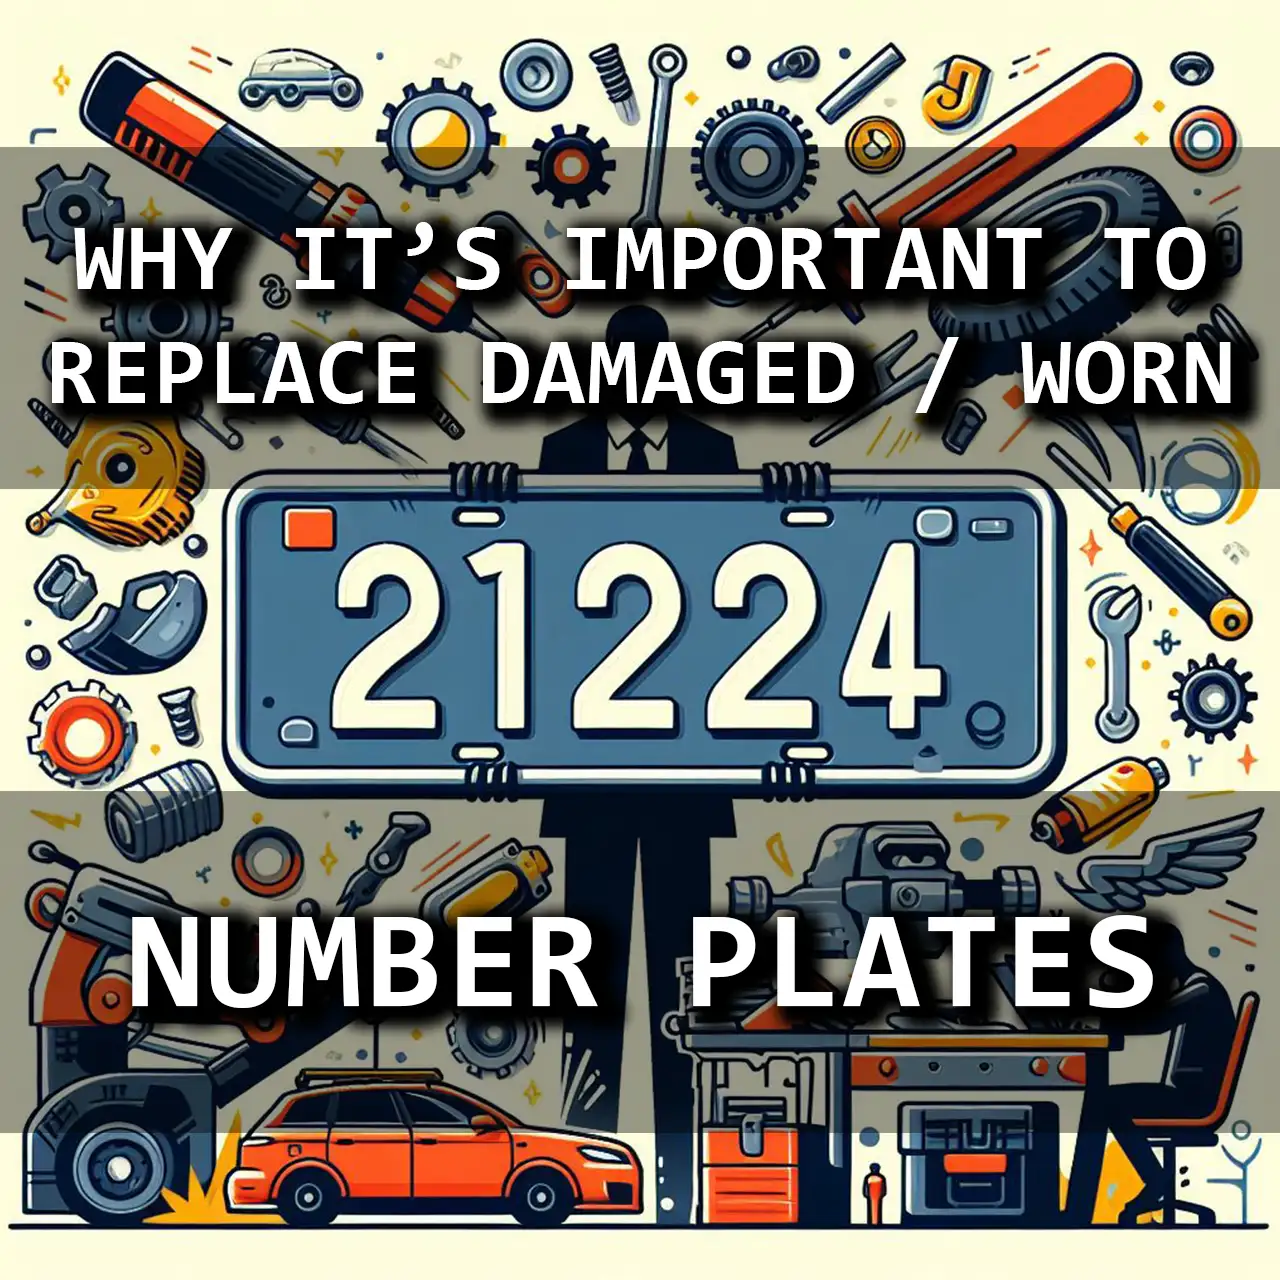 The Importance of Replacing Damaged or Worn Number Plates Promptly